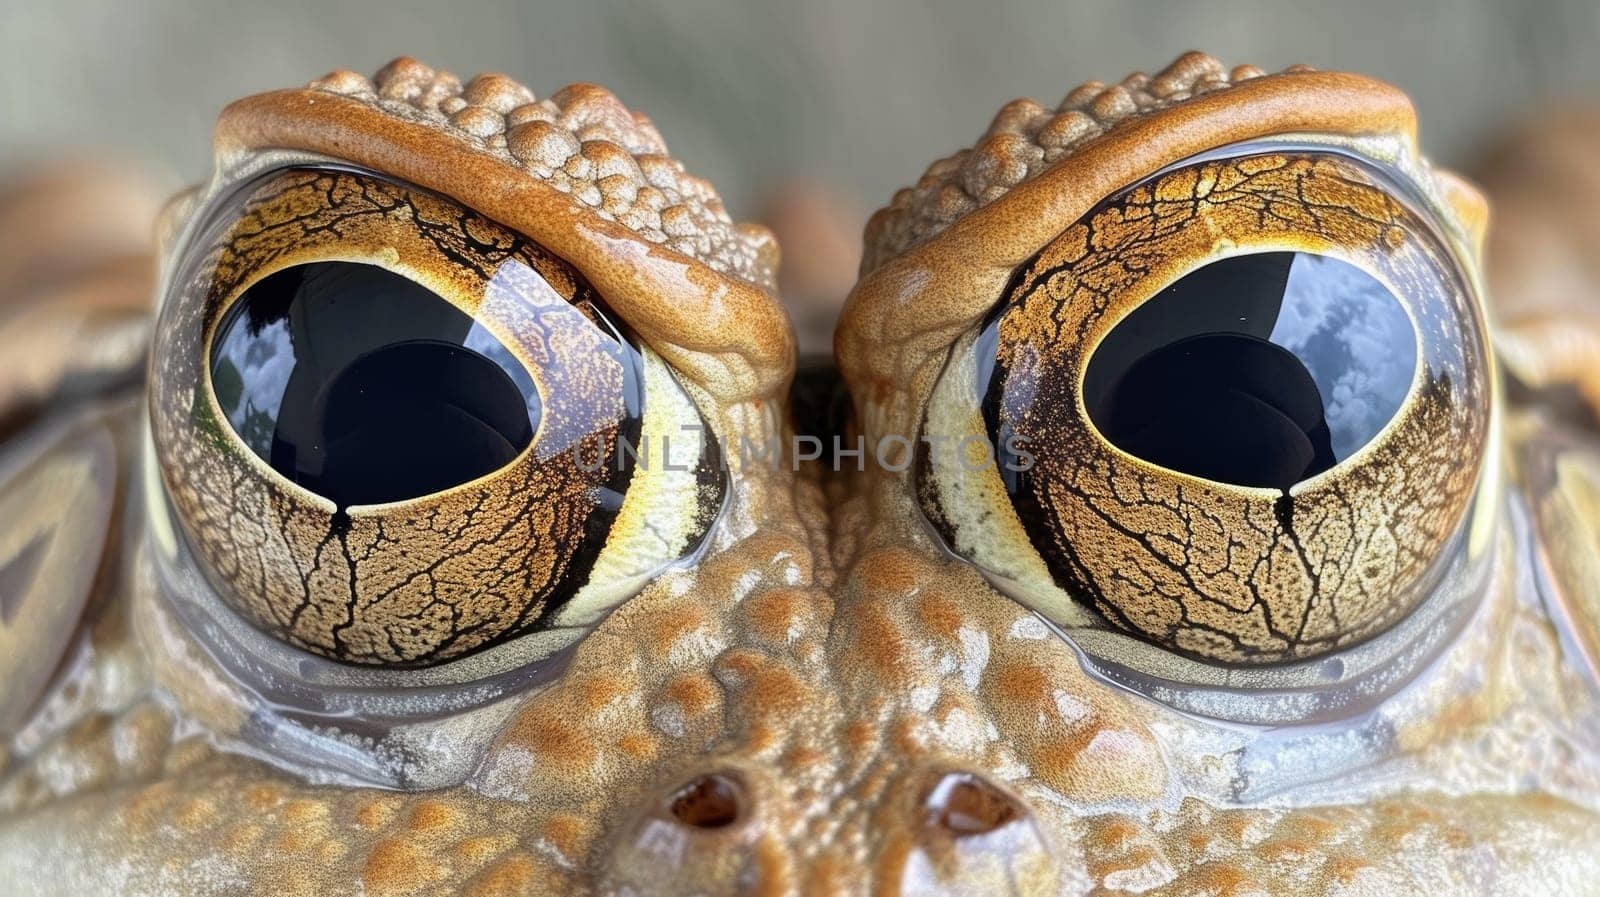 A close up of a frog's eyes with large brown spots